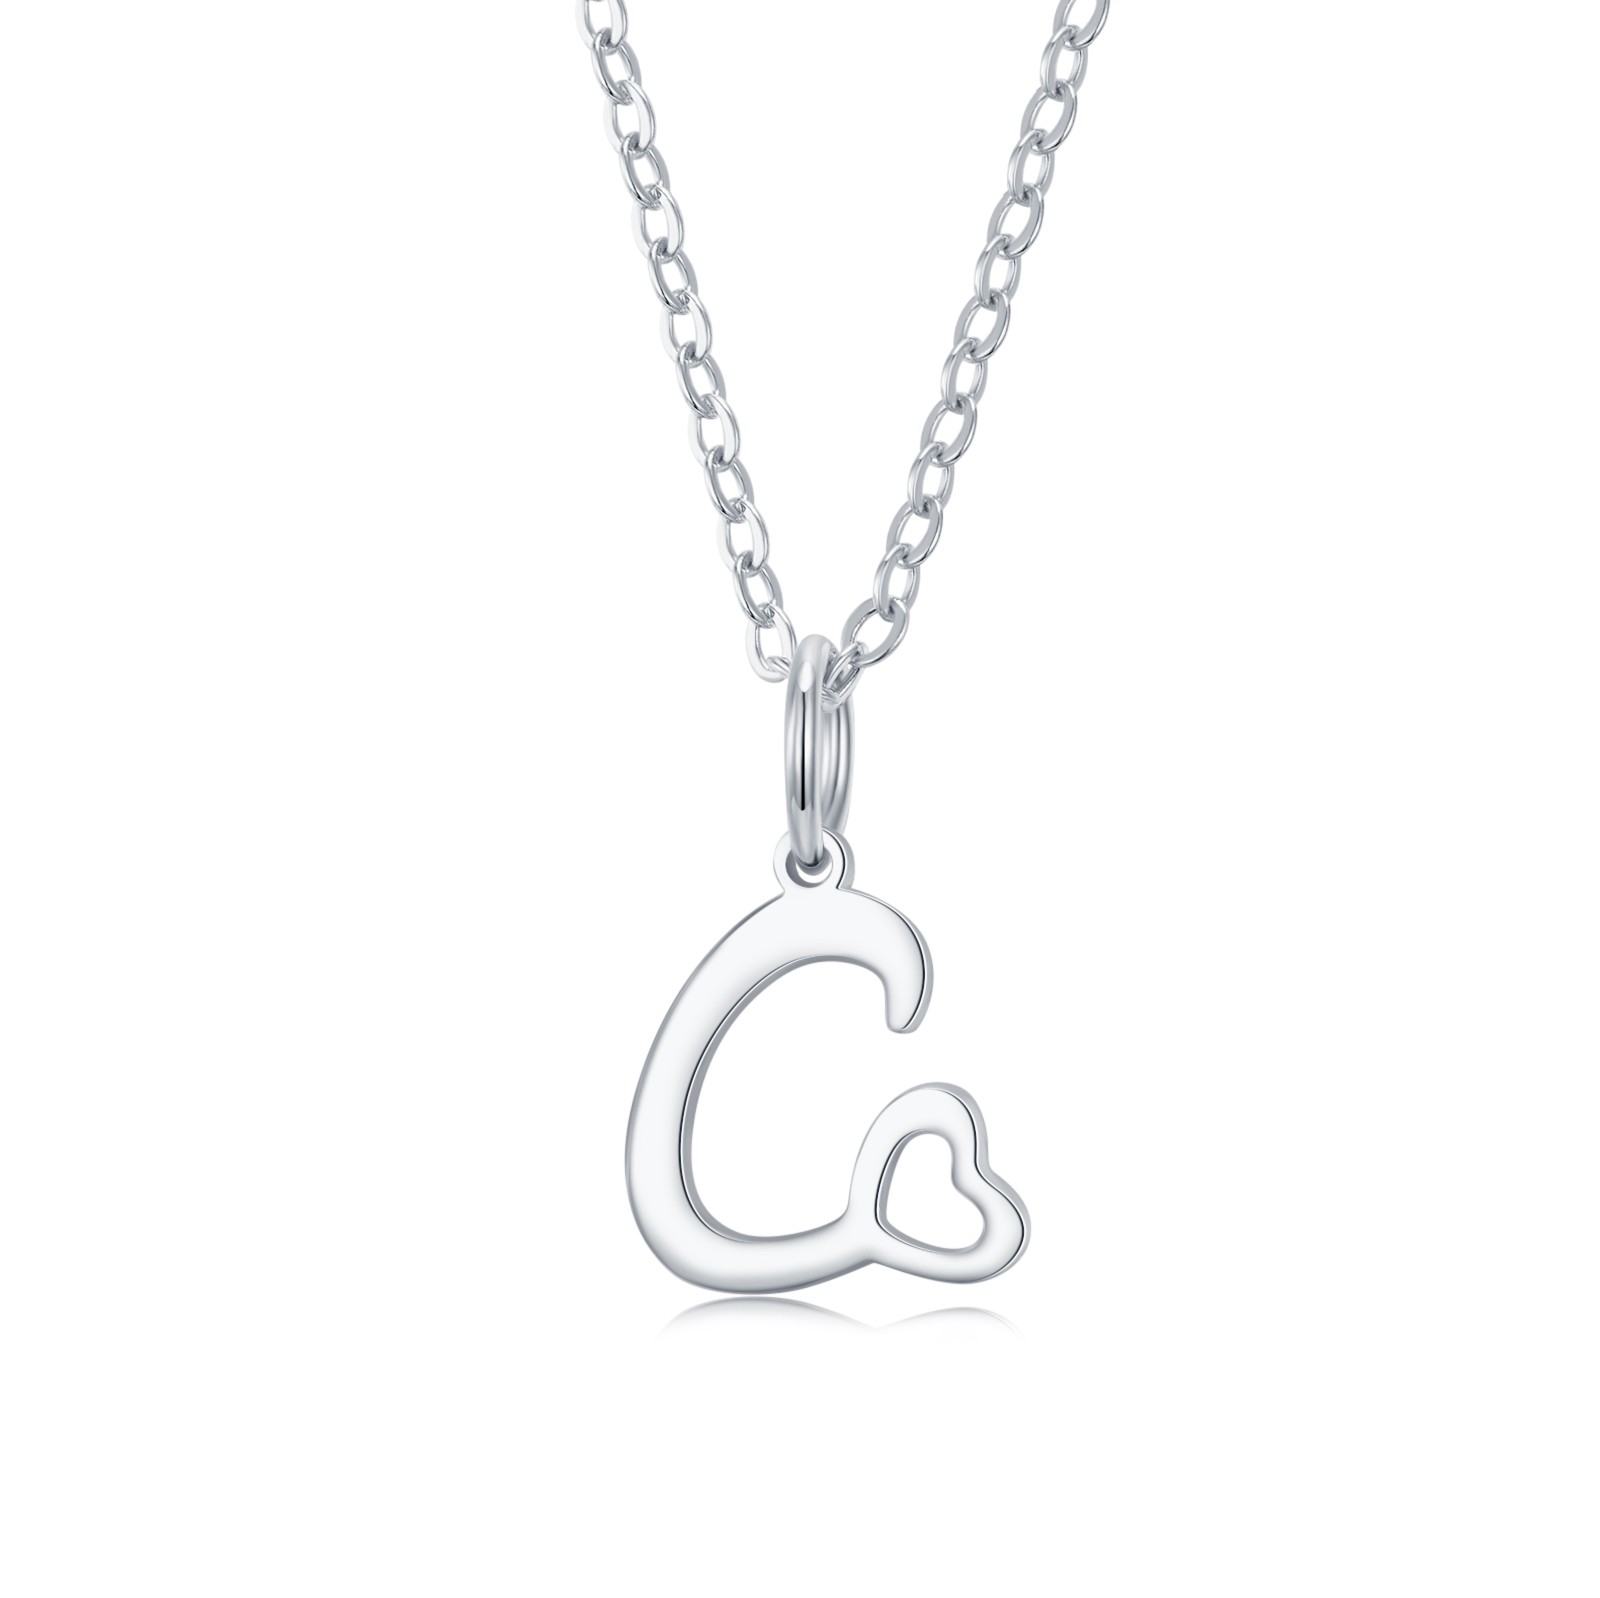 Personalized Initial Necklace with Tiny Heart, Custom Letter Necklaces, Initial Jewelry, Personalized Gifts for Girlfriend/Bridesmaid/Friends